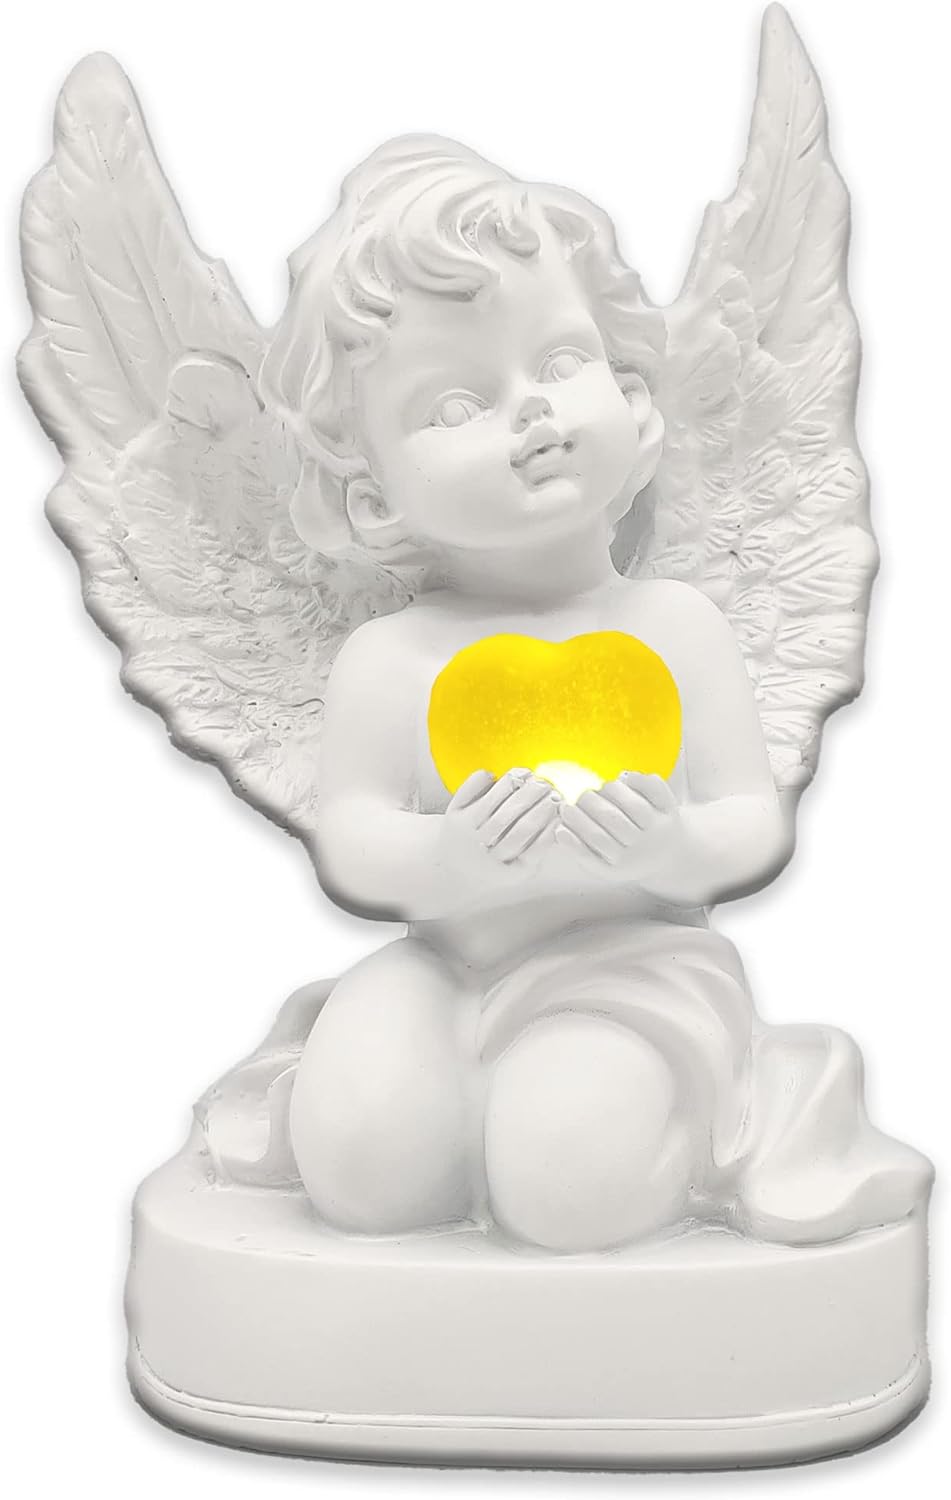 Angel with a heart illuminated by LED that changes colors - batteries included